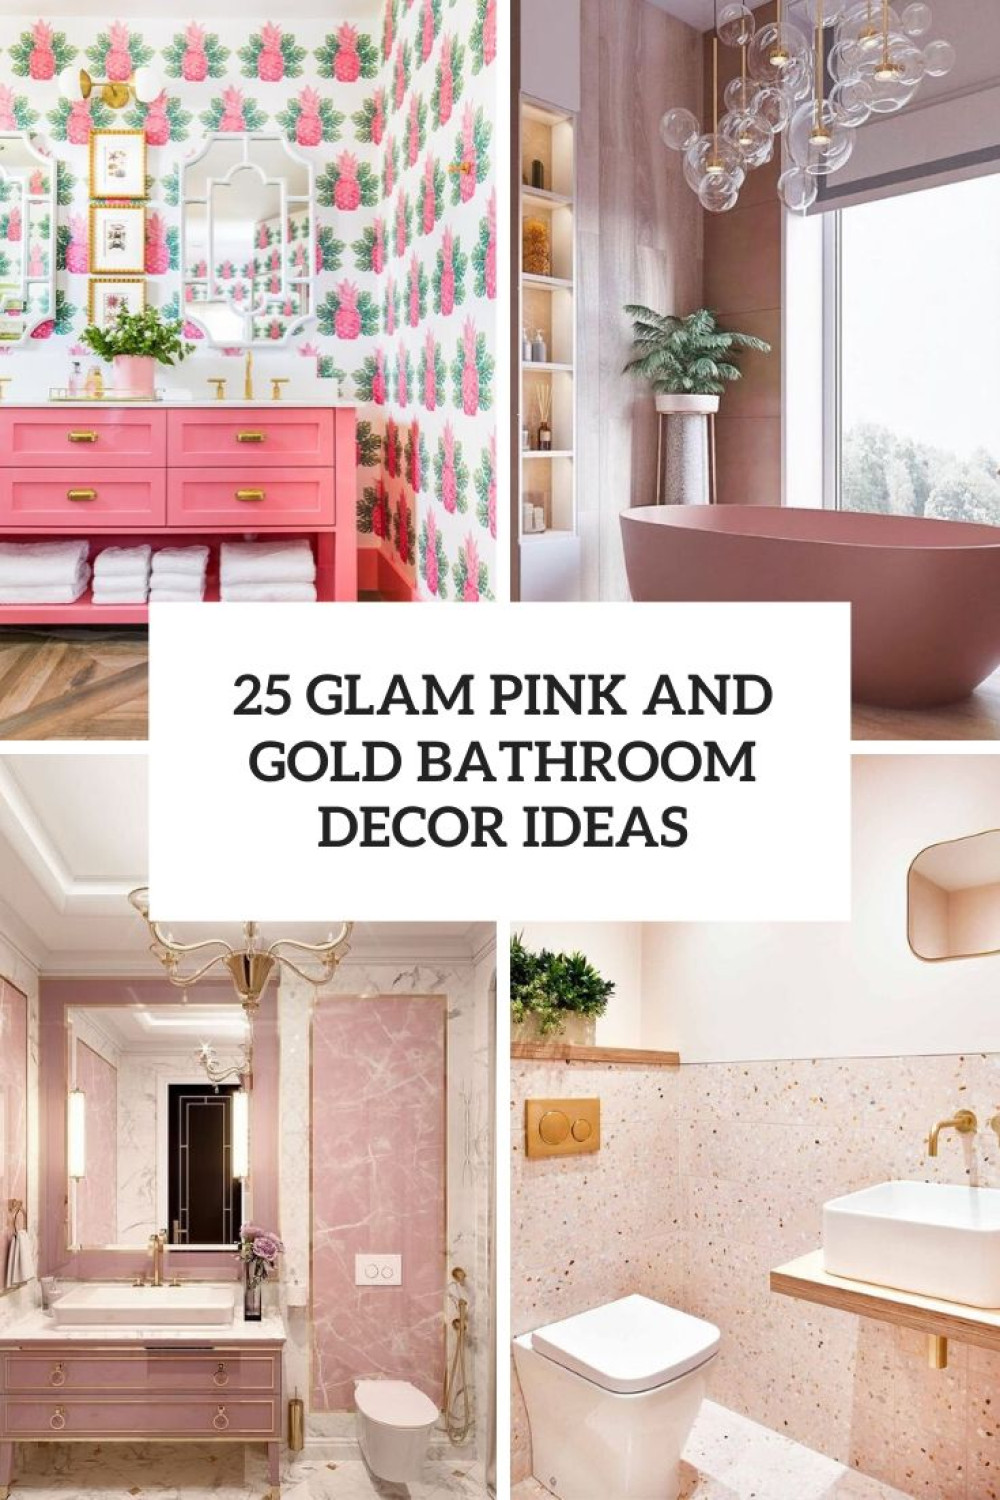 Glam Pink And Gold Bathroom Decor Ideas - DigsDigs